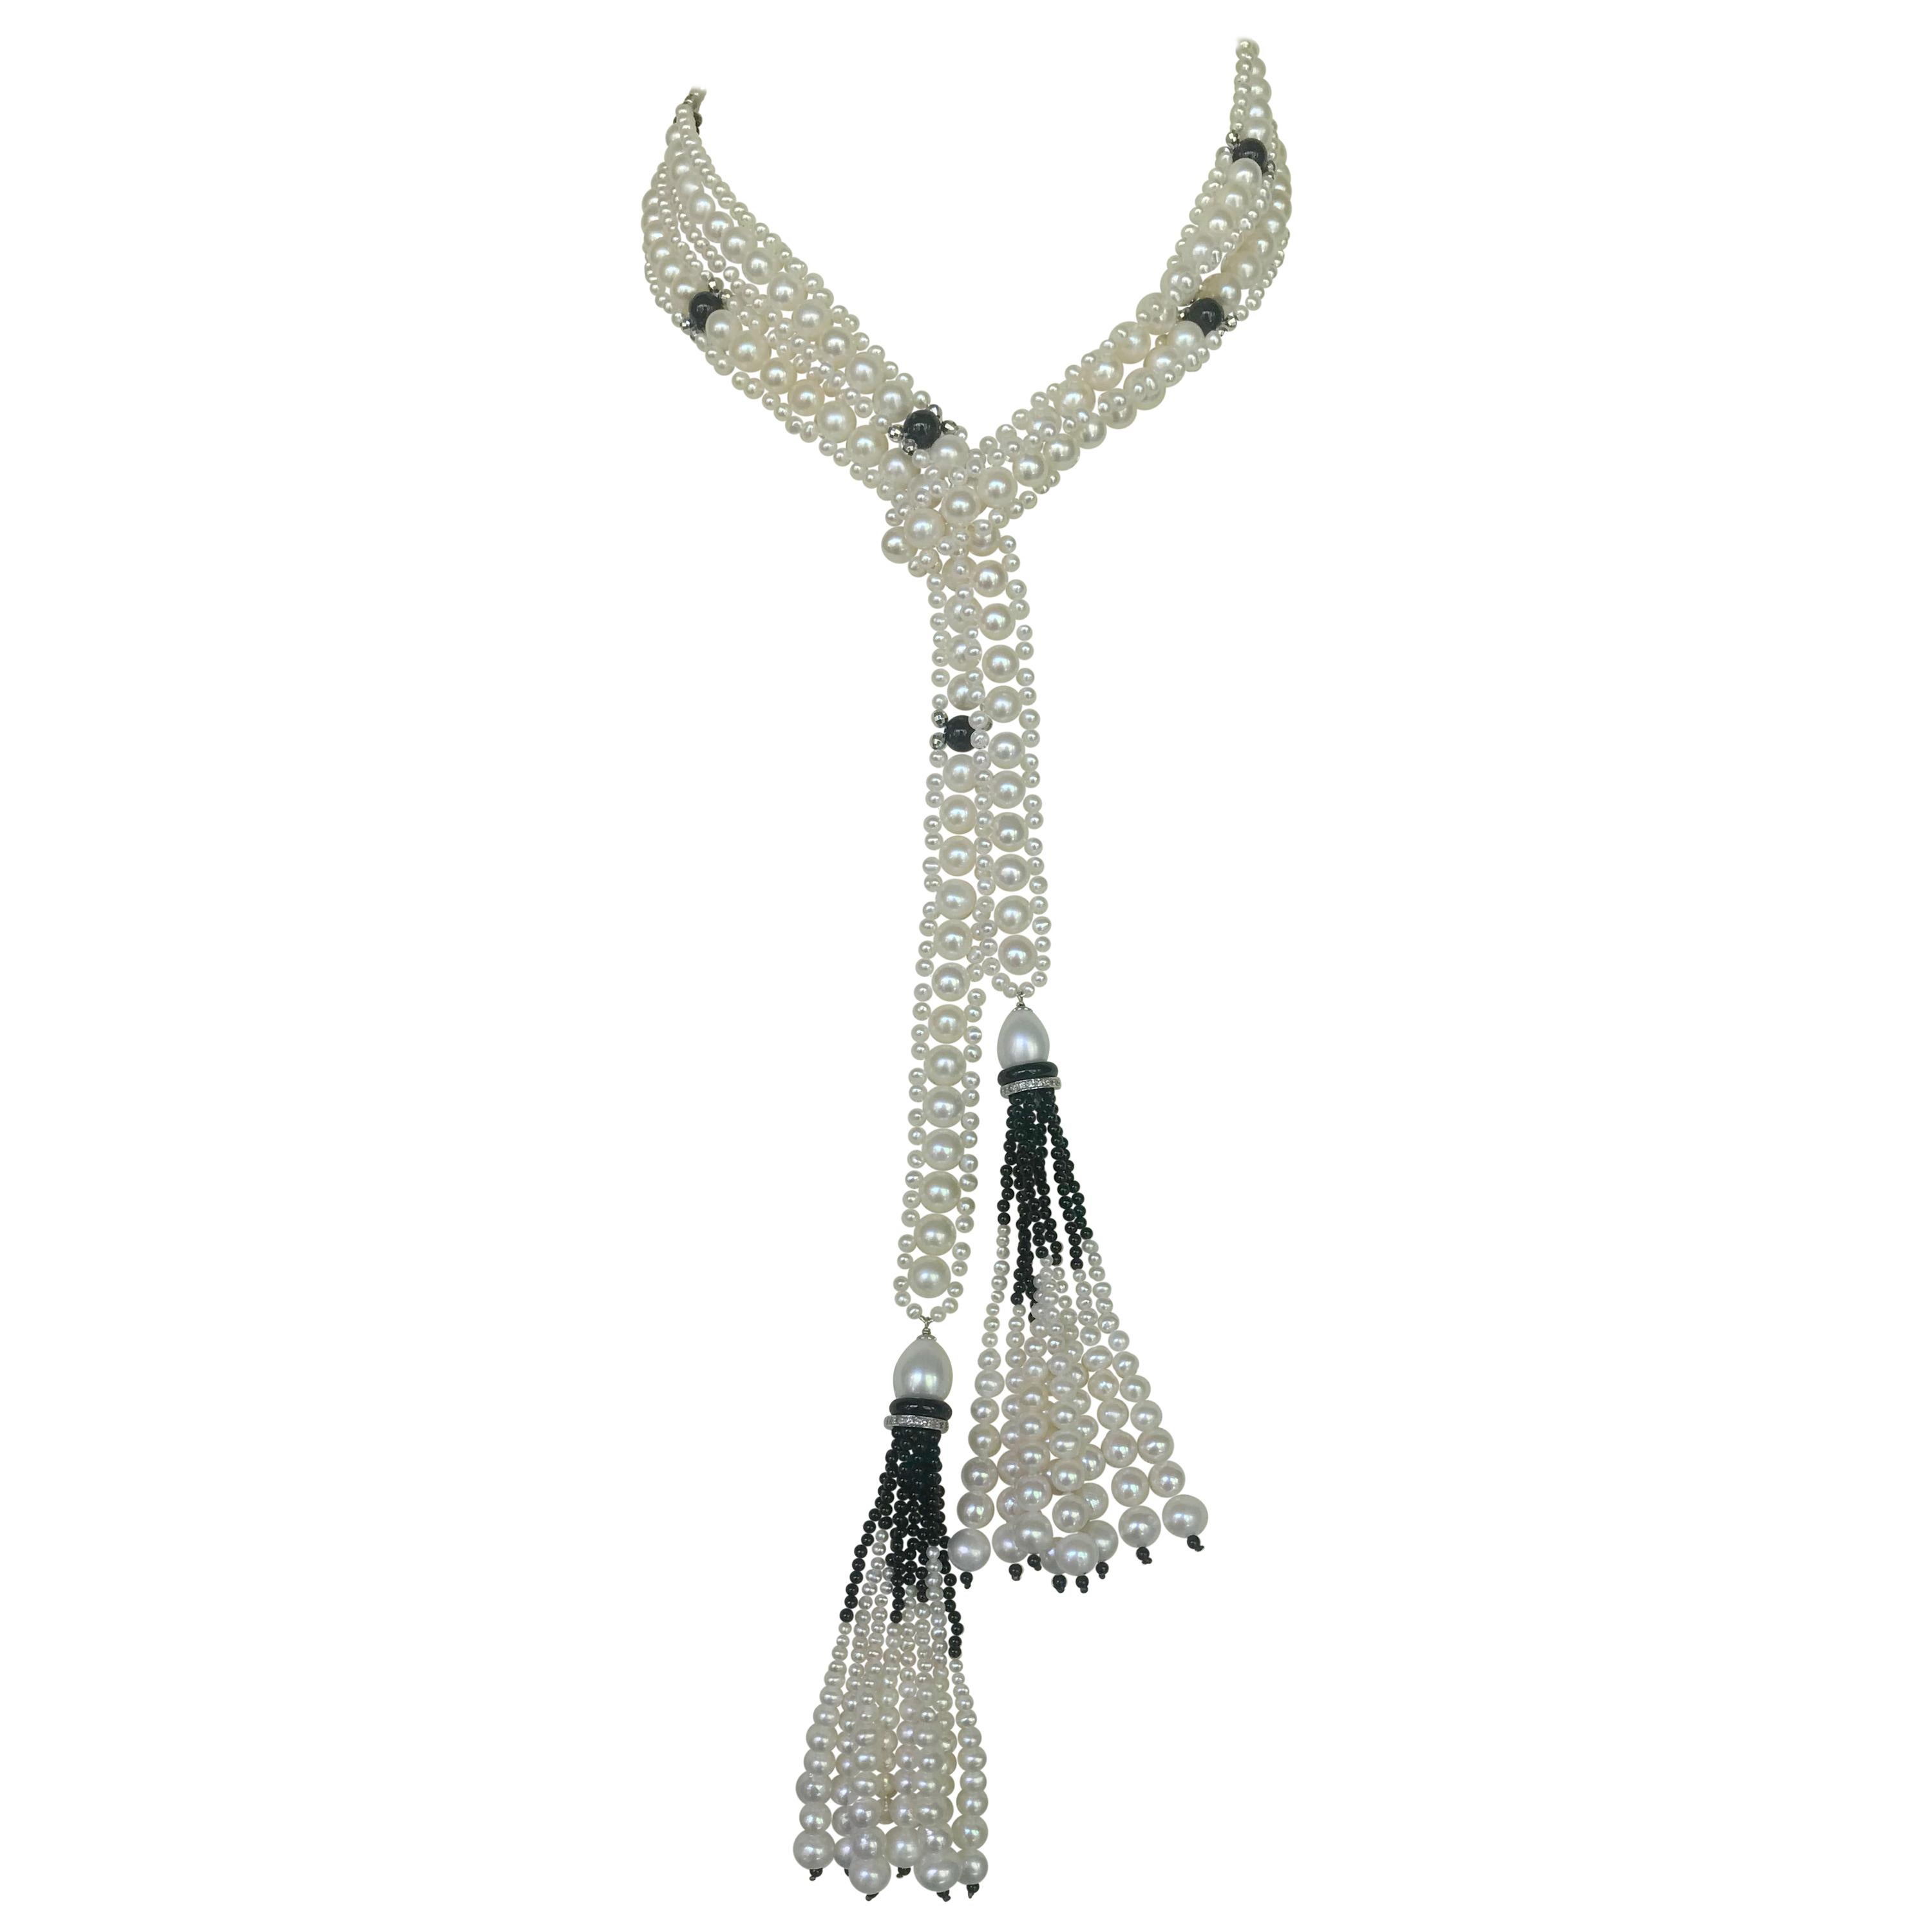 Marina J Woven Pearl Sautoir with Tassels and 14 K White Gold and Onyx beads